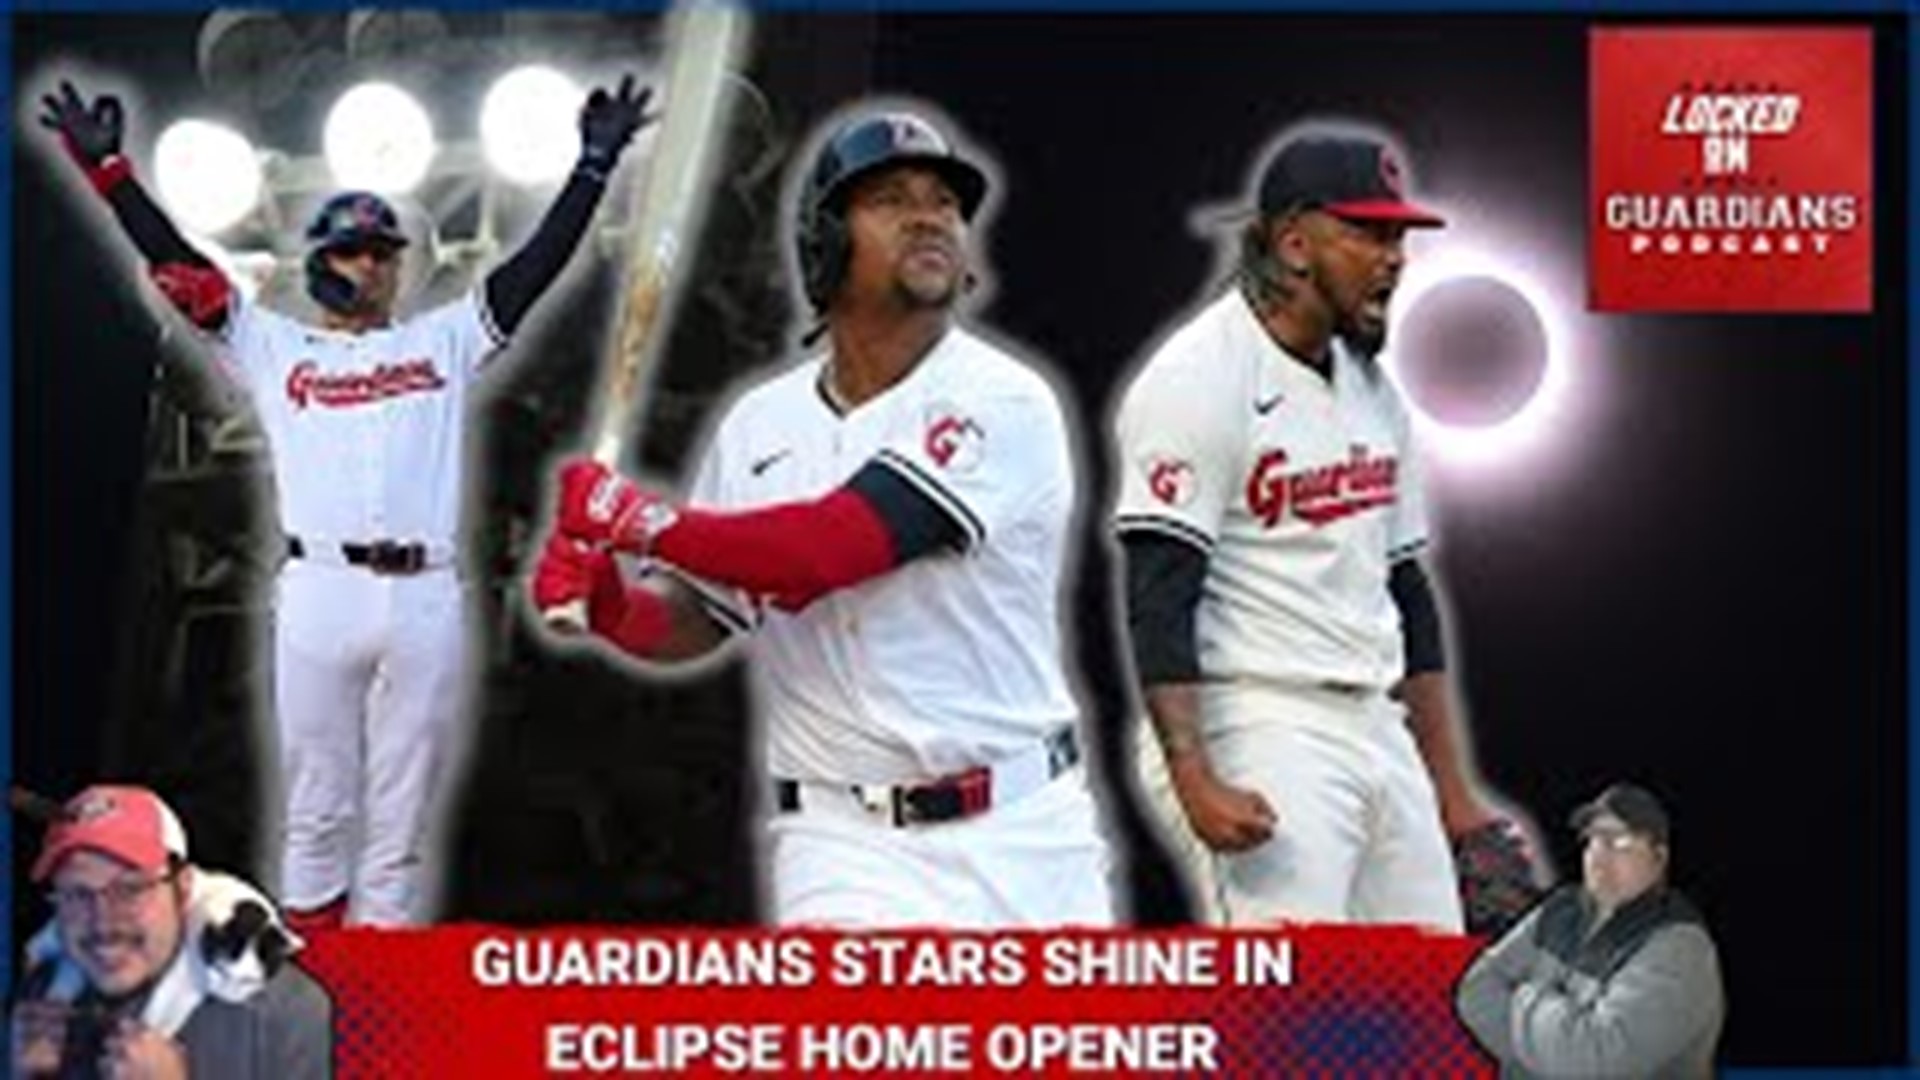 The solar eclipse was cool, but another Cleveland Guardians win is even cooler.

We break down all of the good stuff from the Cleveland Guardians home opener!